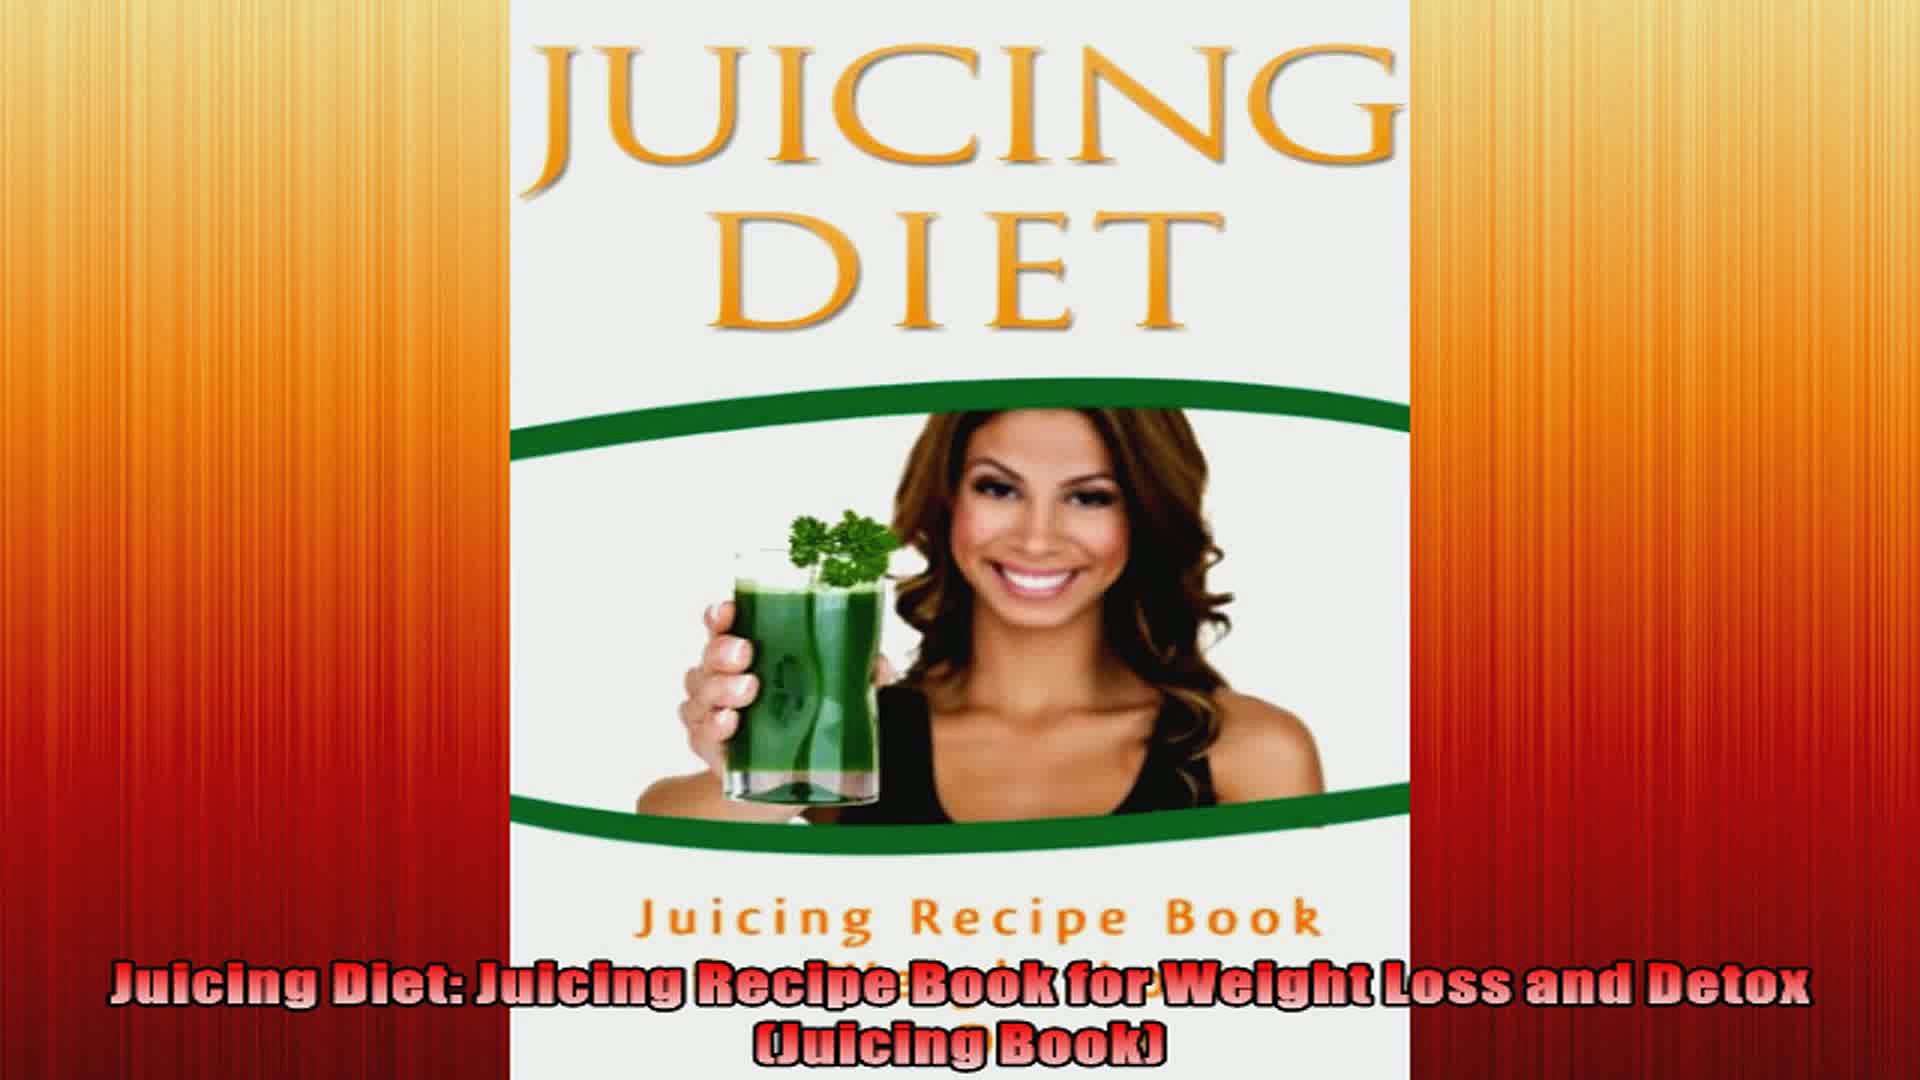 ⁣Juicing Diet Juicing Recipe Book for Weight Loss and Detox Juicing Book